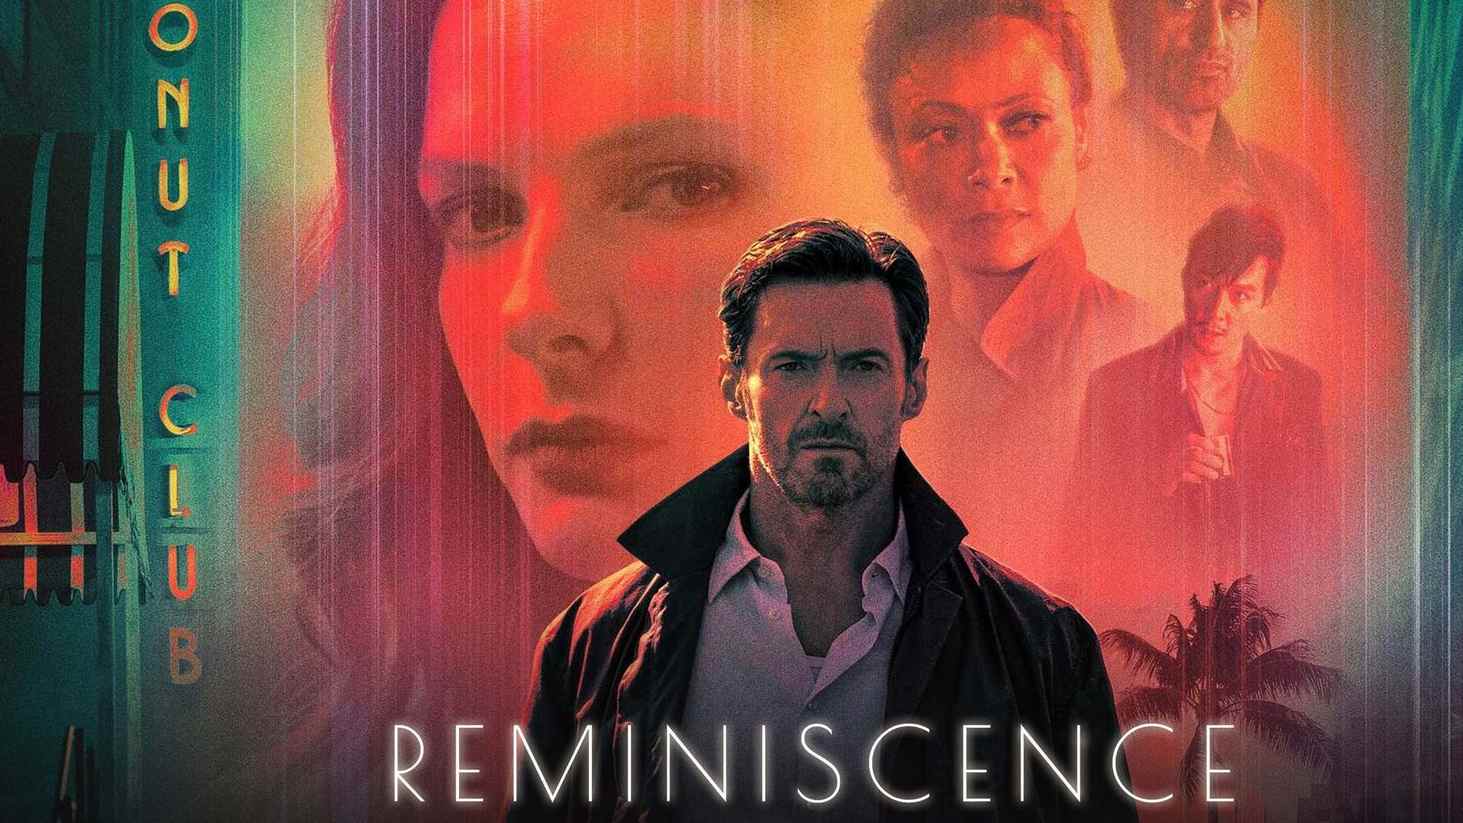 Reminiscence stars our own Hugh Jackman